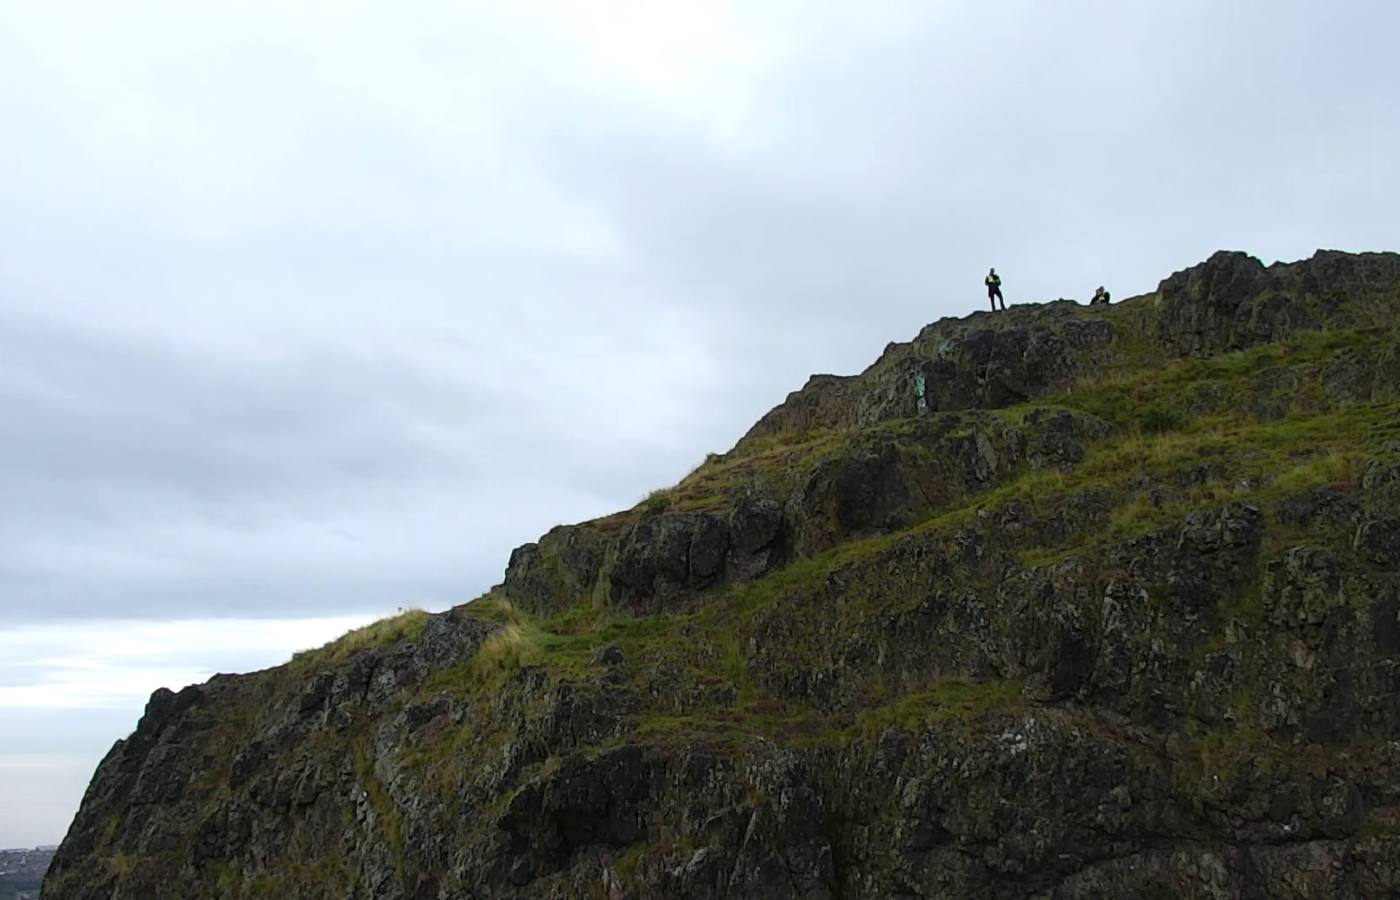 Police survey the fall area at Arthur's Seat.